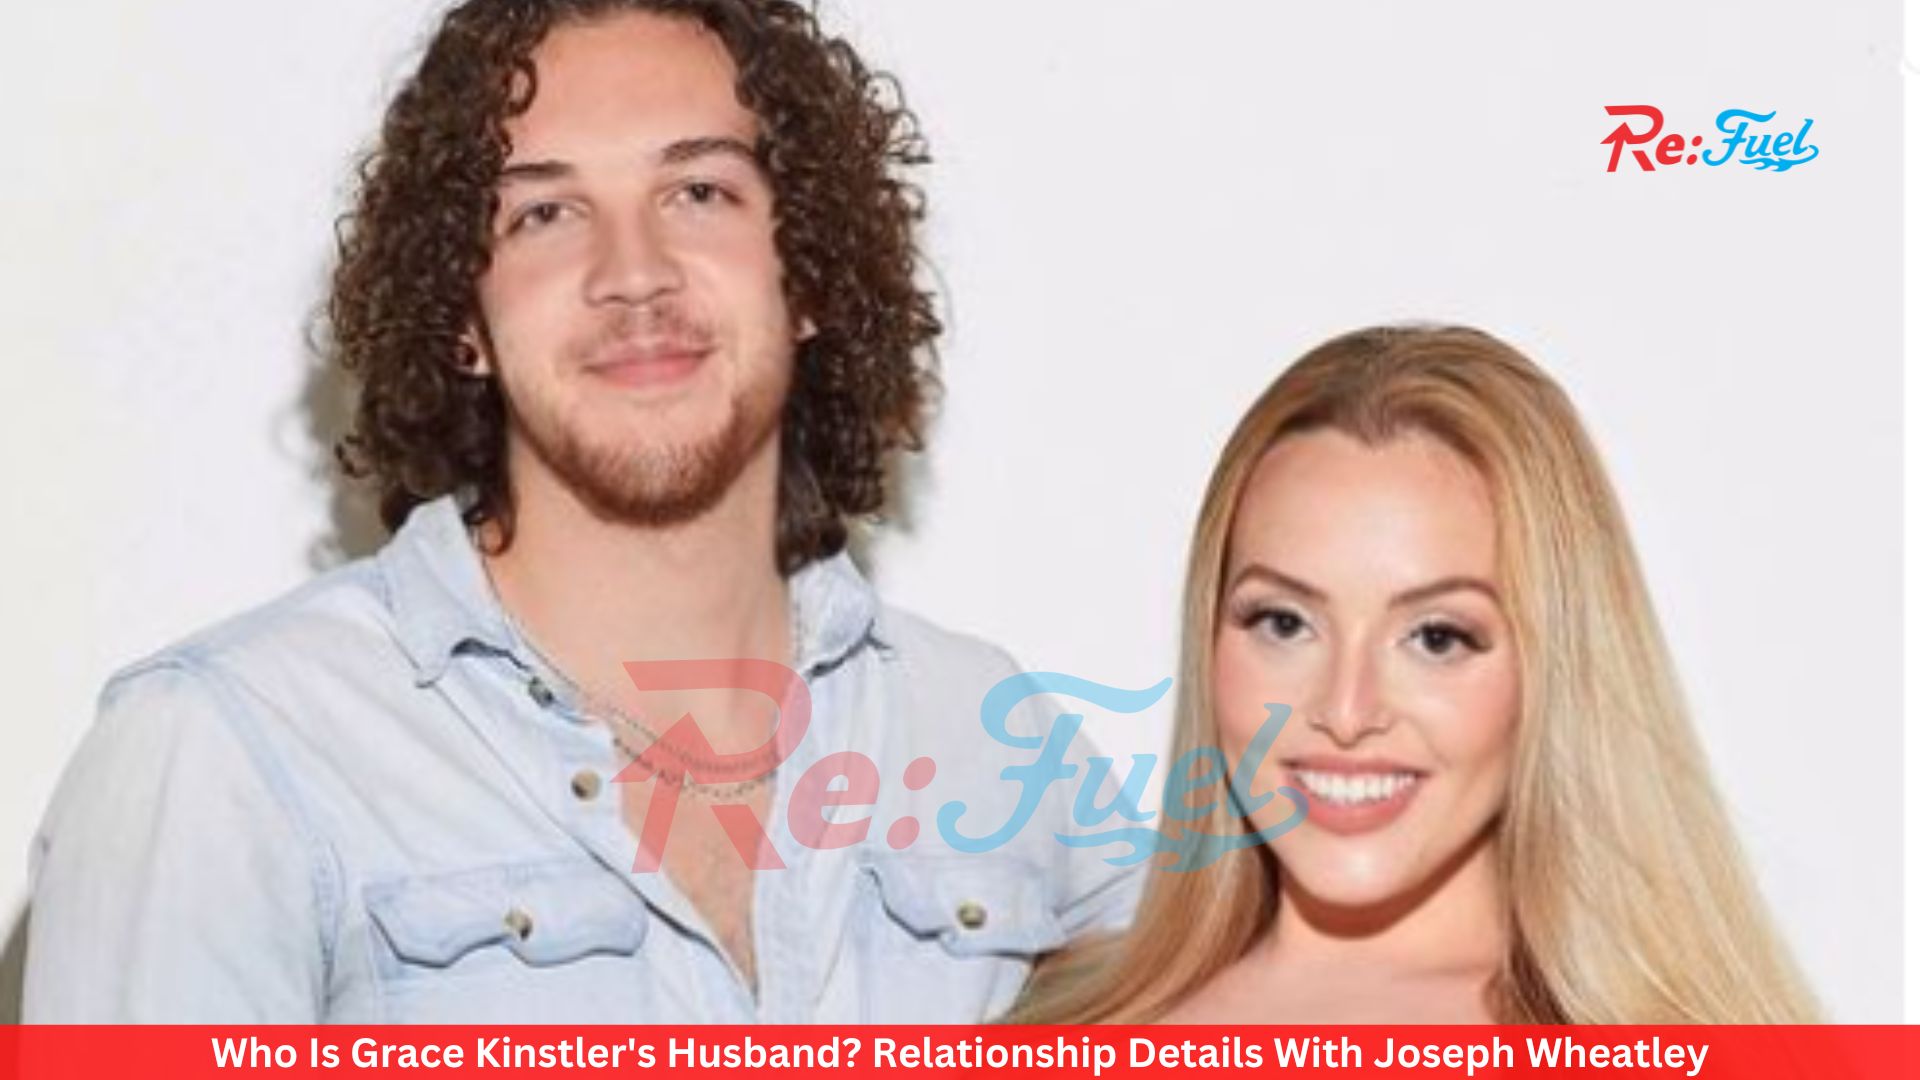 Who Is Grace Kinstler's Husband? Relationship Details With Joseph Wheatley